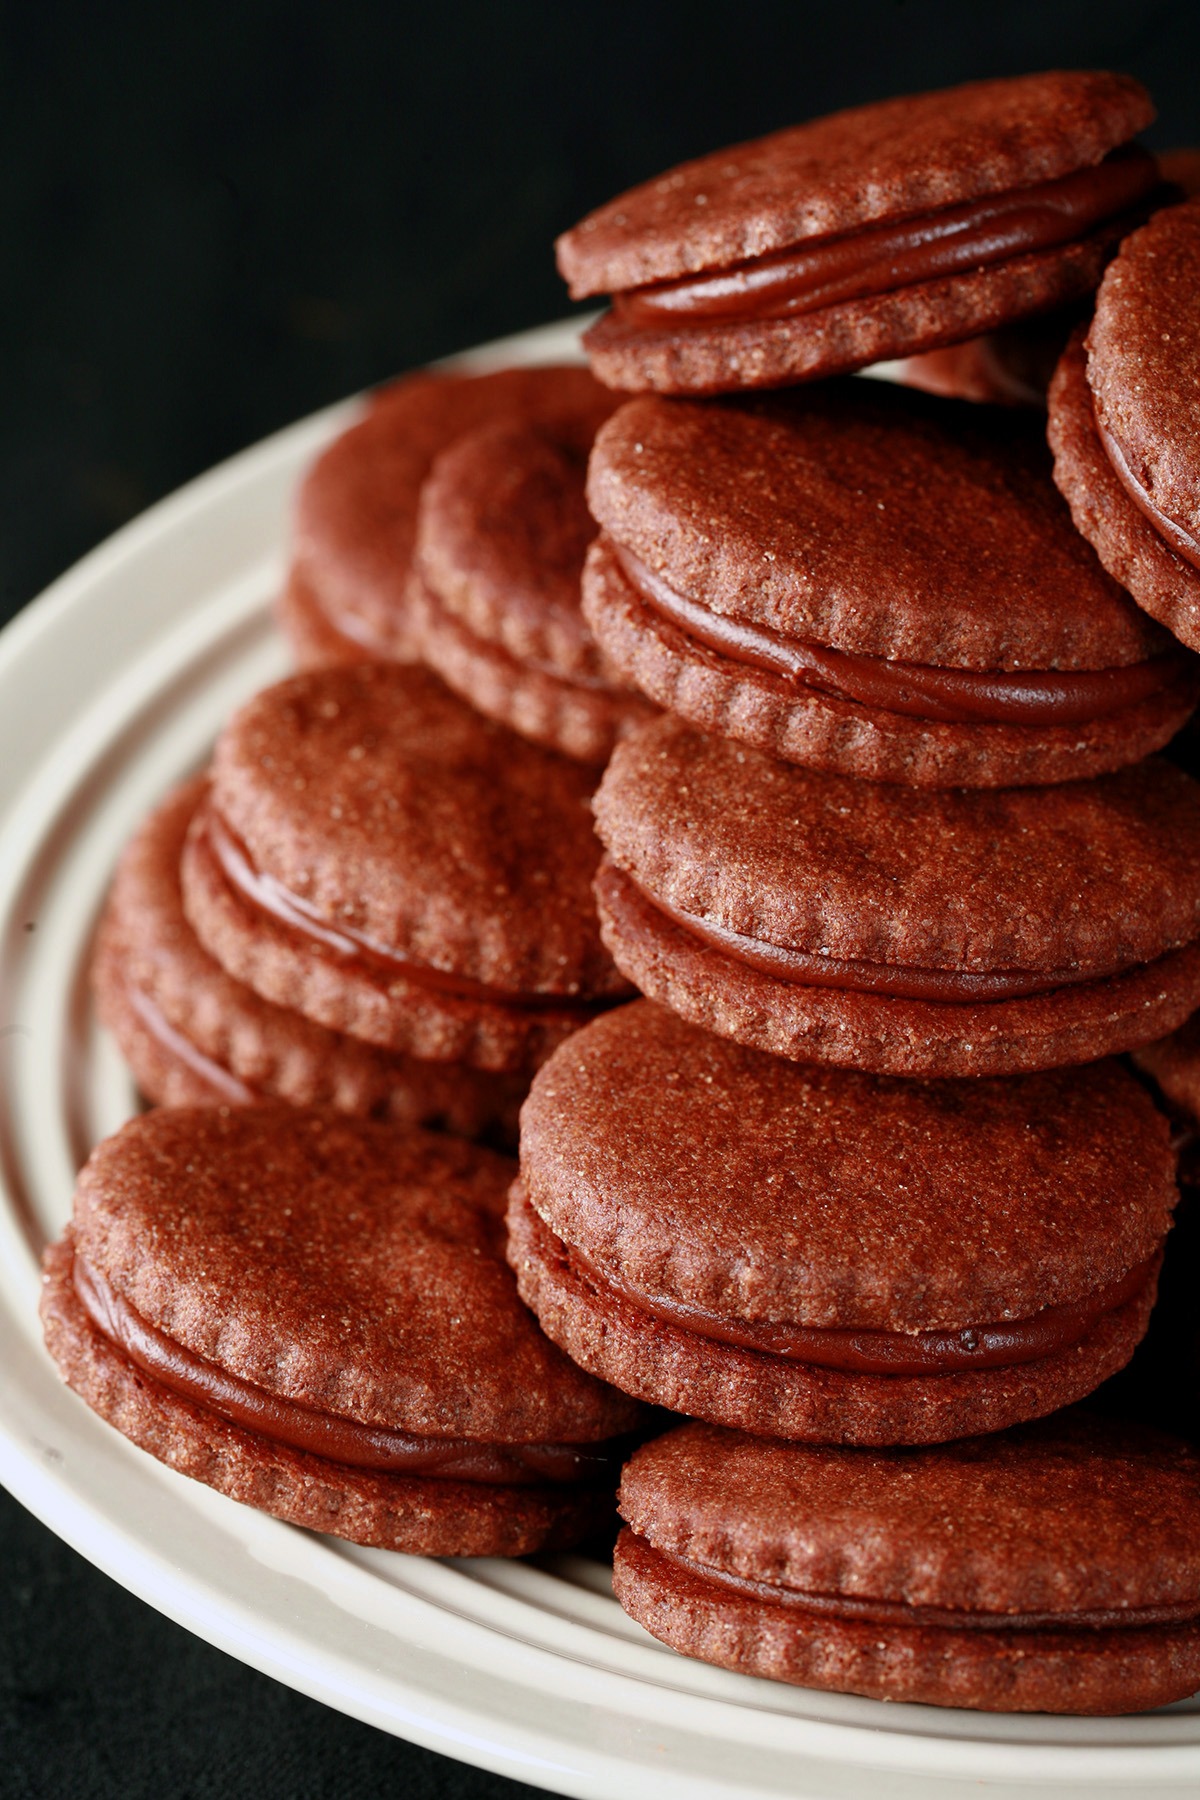 A plate of gluten free chocolate sandwich cookies.